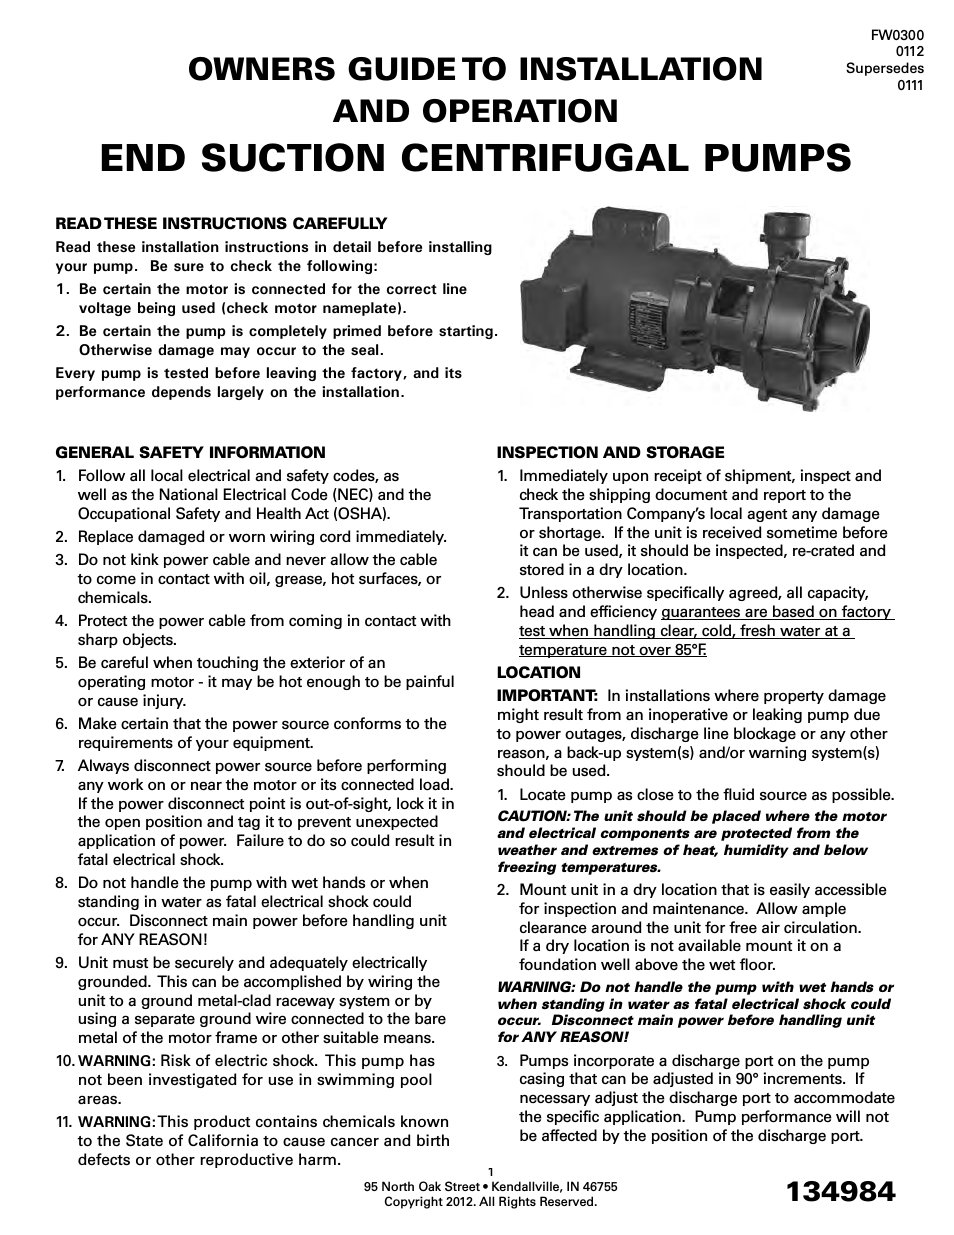 Constant Pressure Pumping Stations - end suction centrifugal pumps